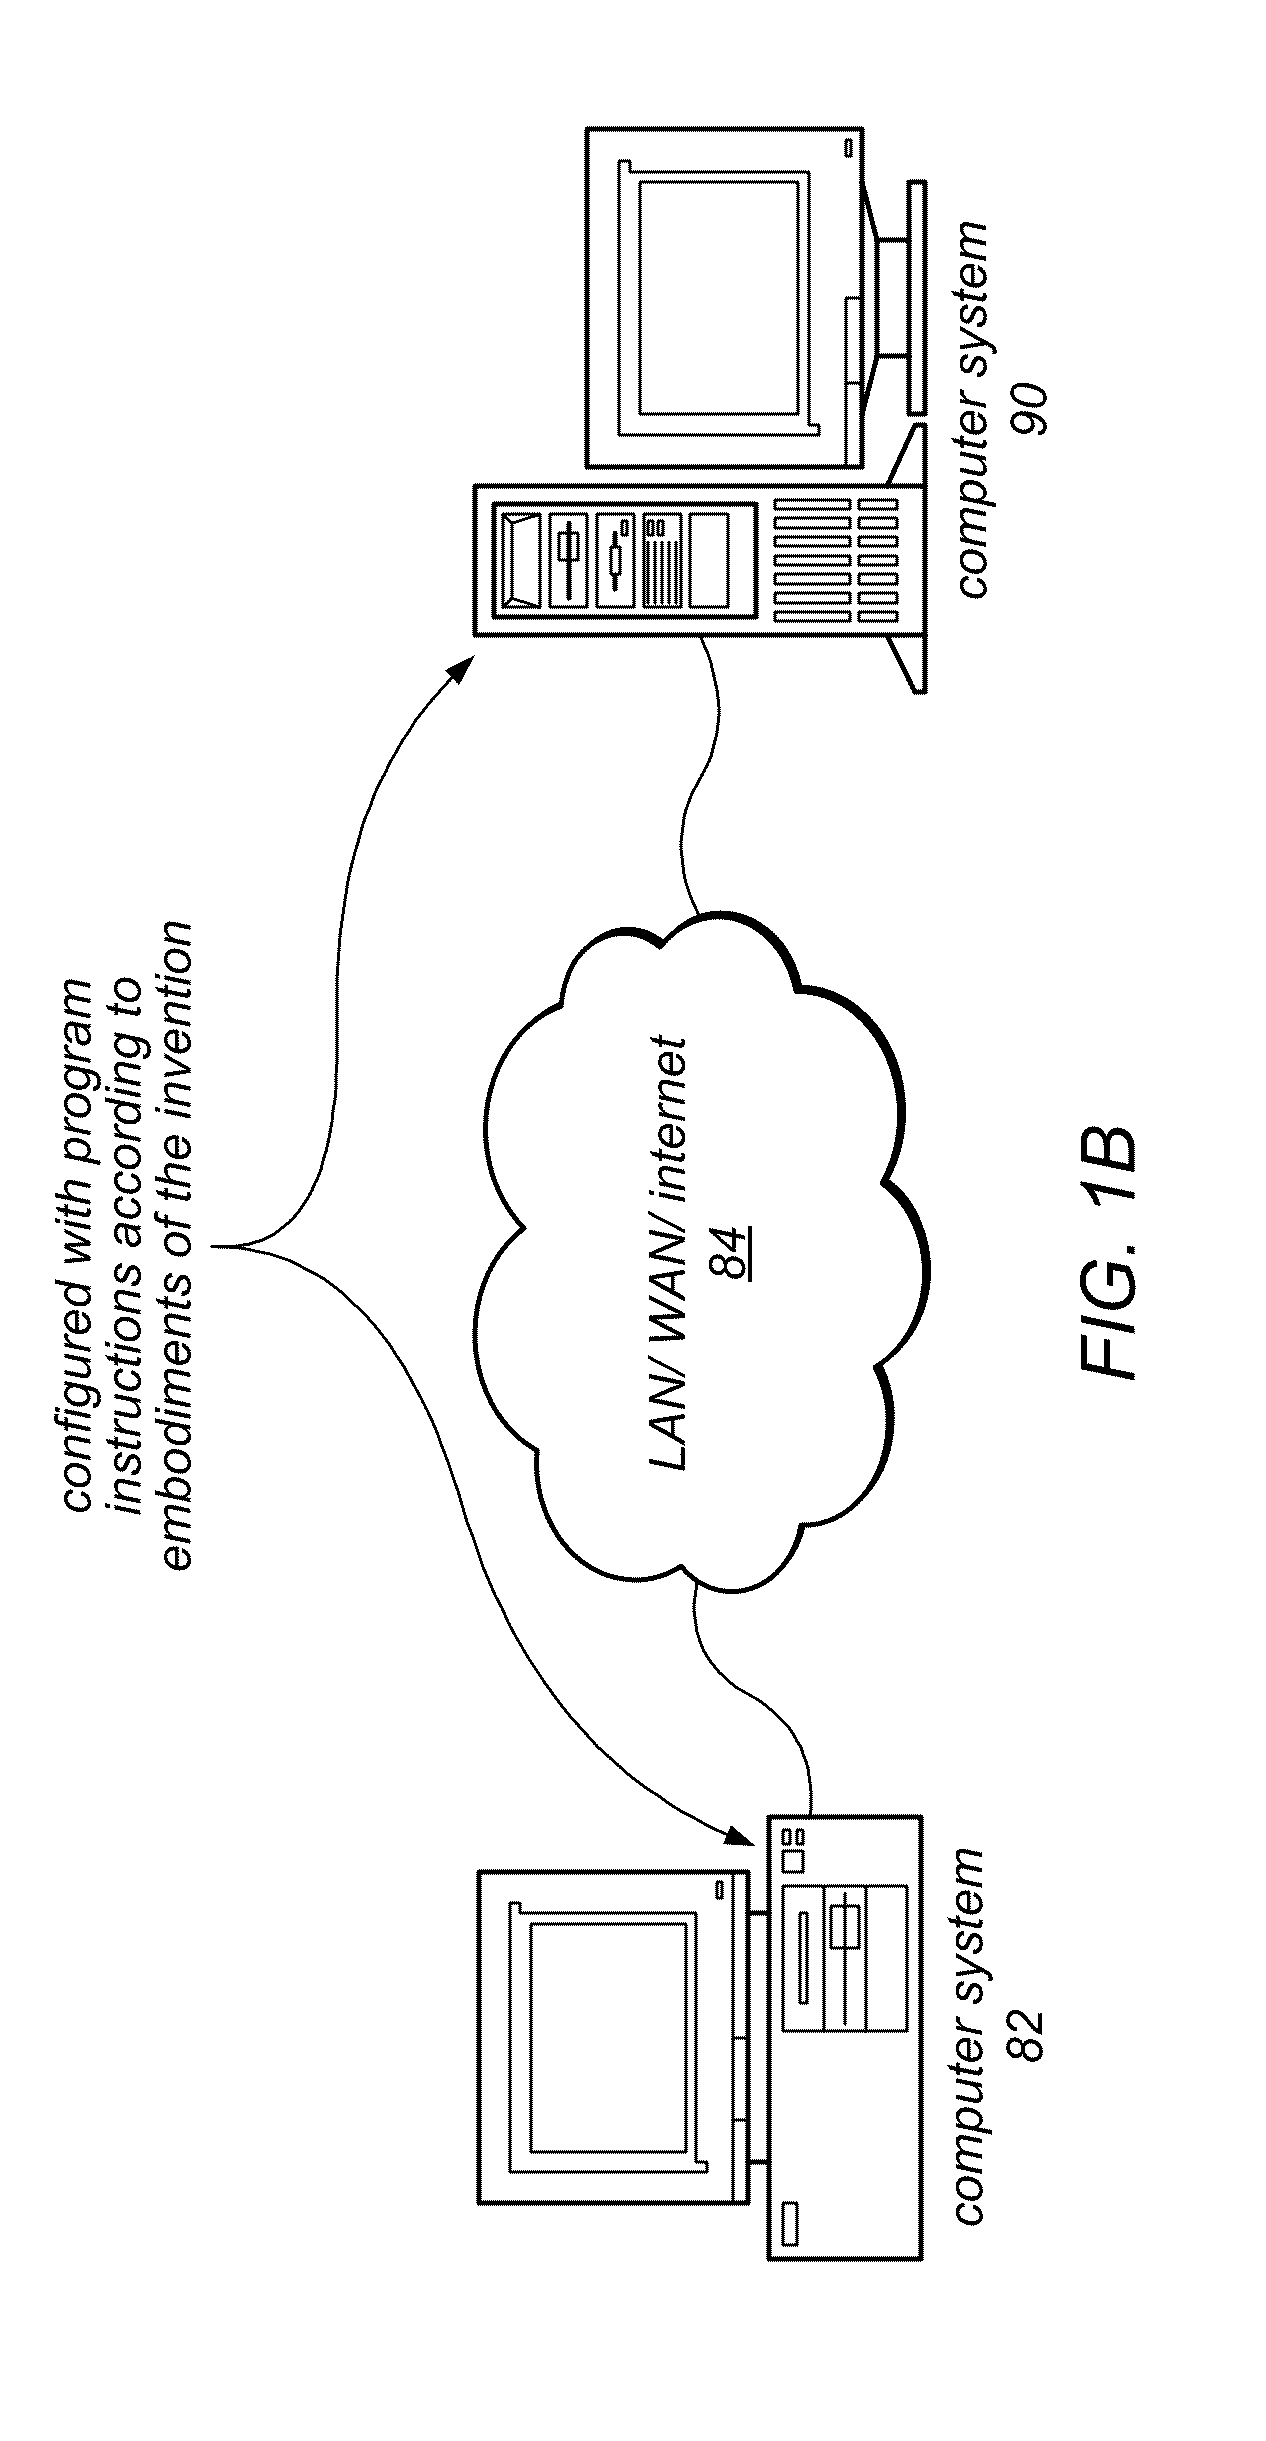 Graphical indicator which specifies parallelization of iterative program code in a graphical data flow program